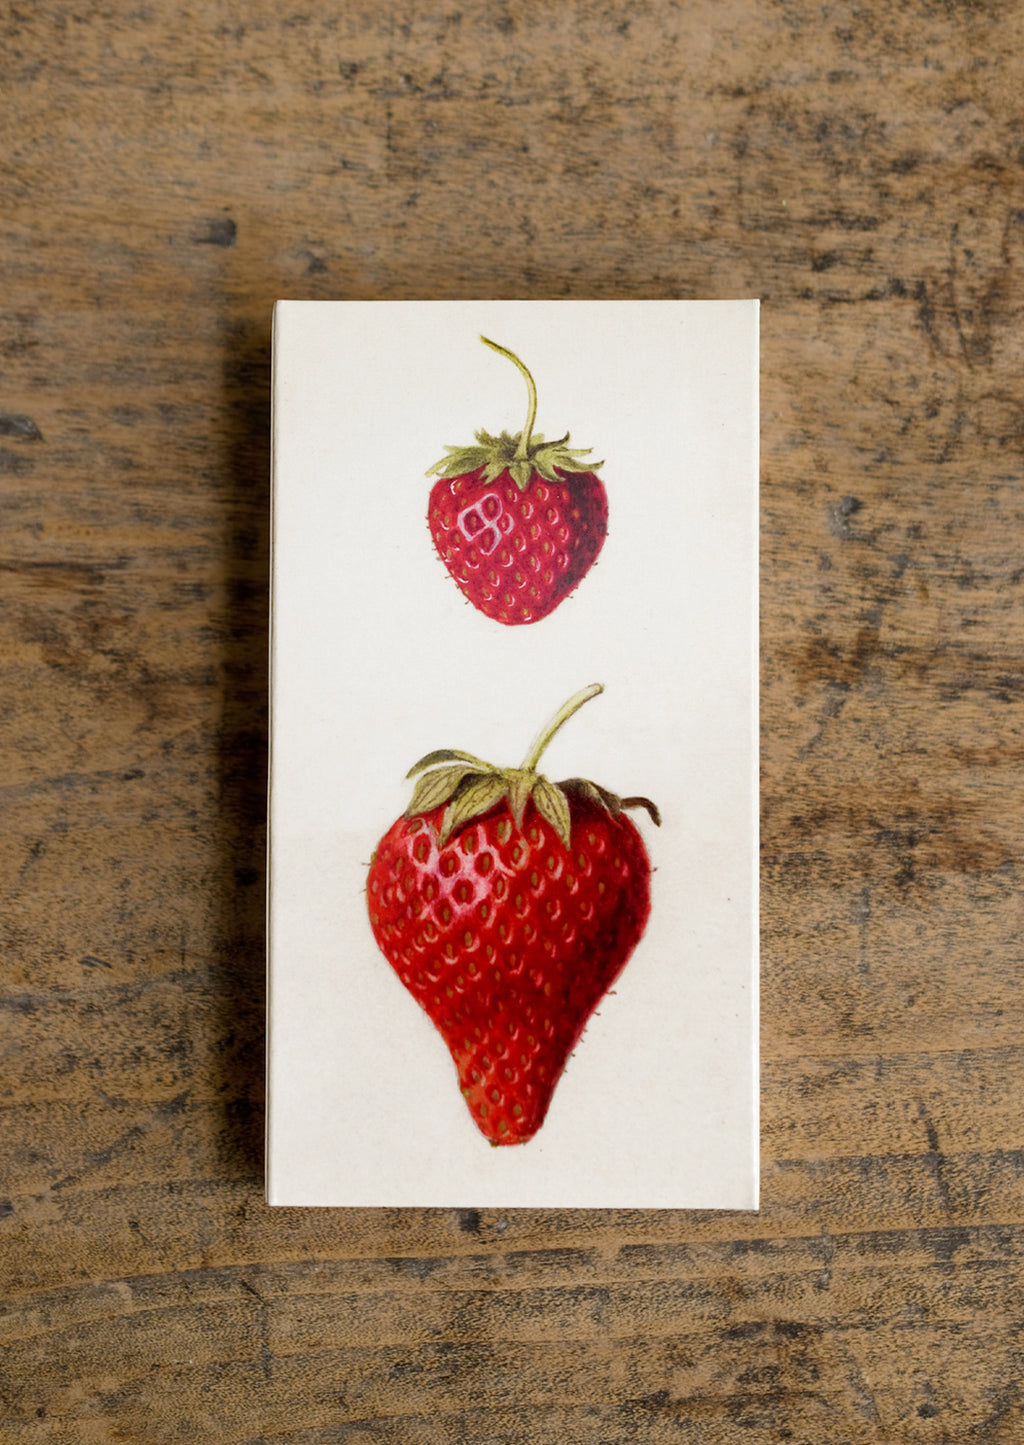 2: A box of long red tipped matches, box has vintage-inspired strawberry illustration.